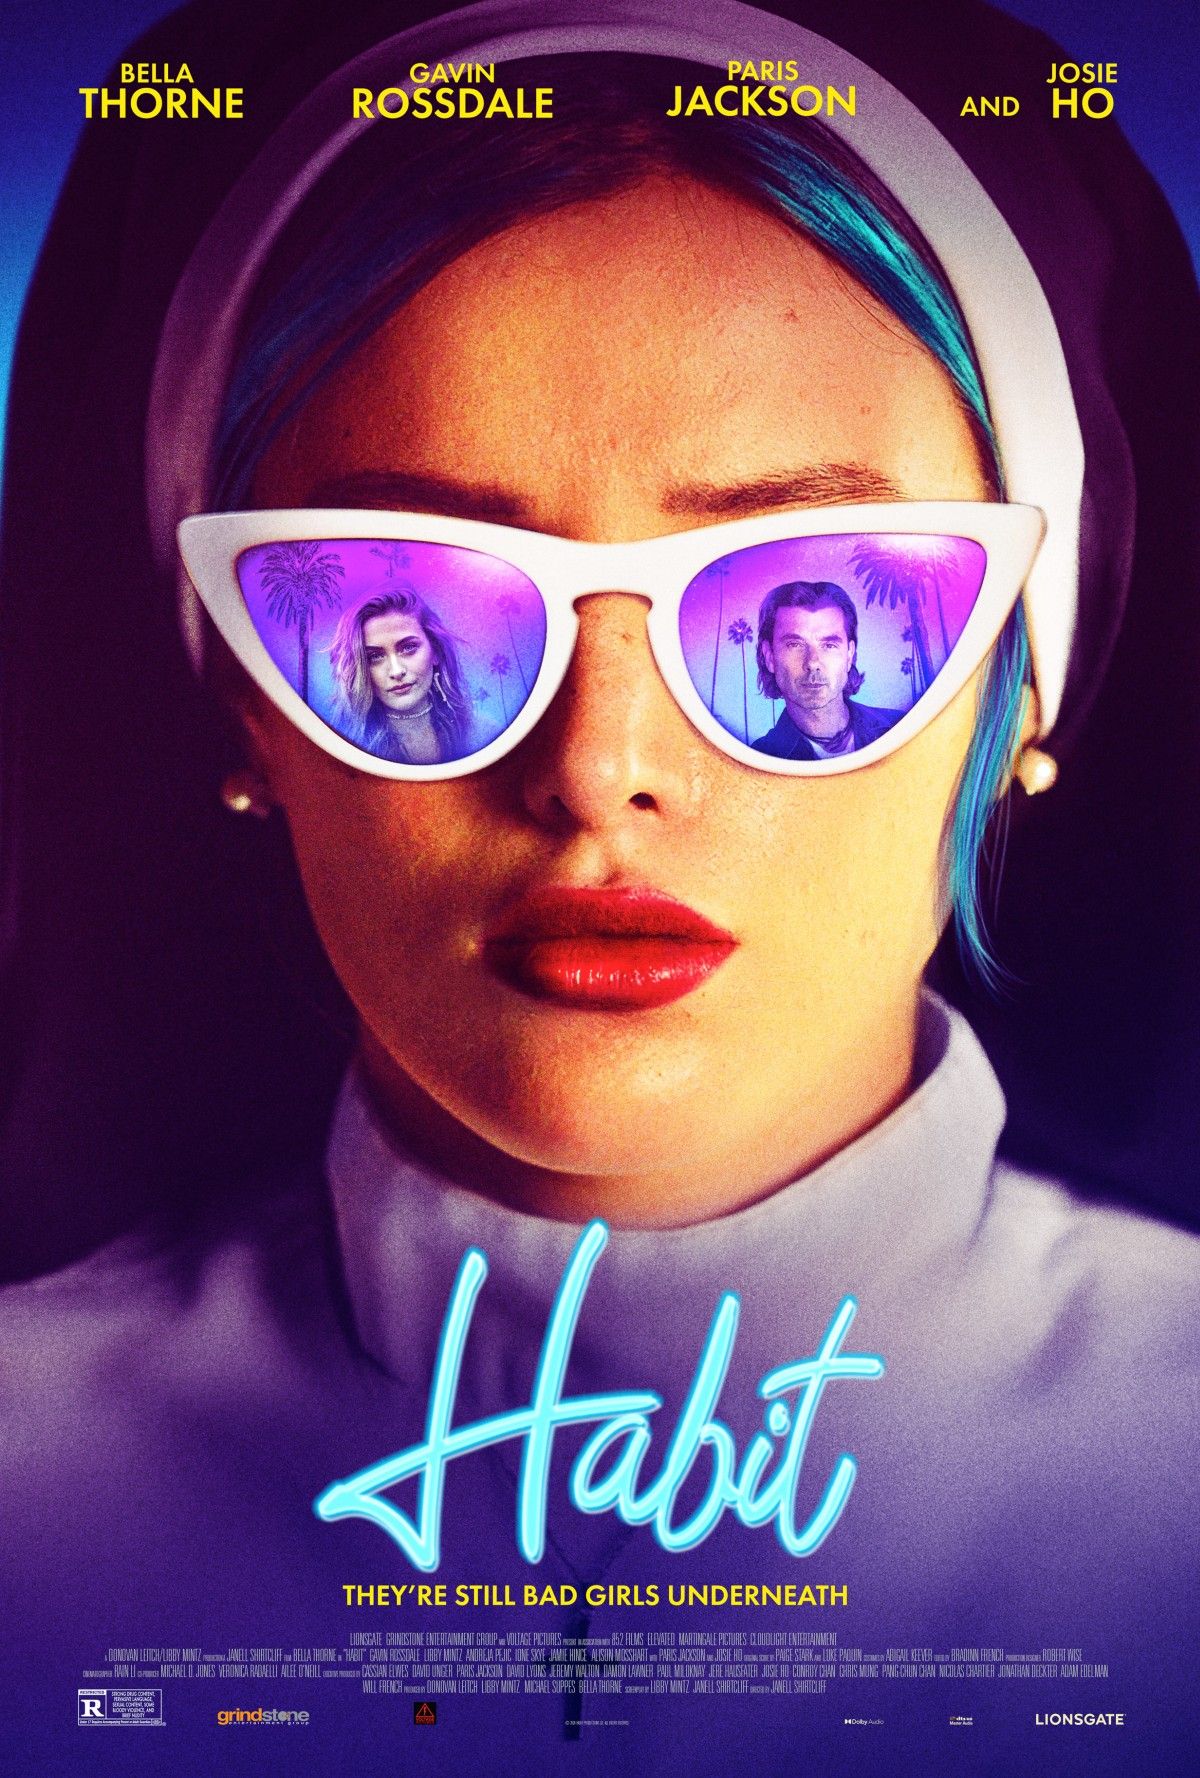 Bella Thorne's Habit Trailer Finds Her Posing as a Nun With a Gun